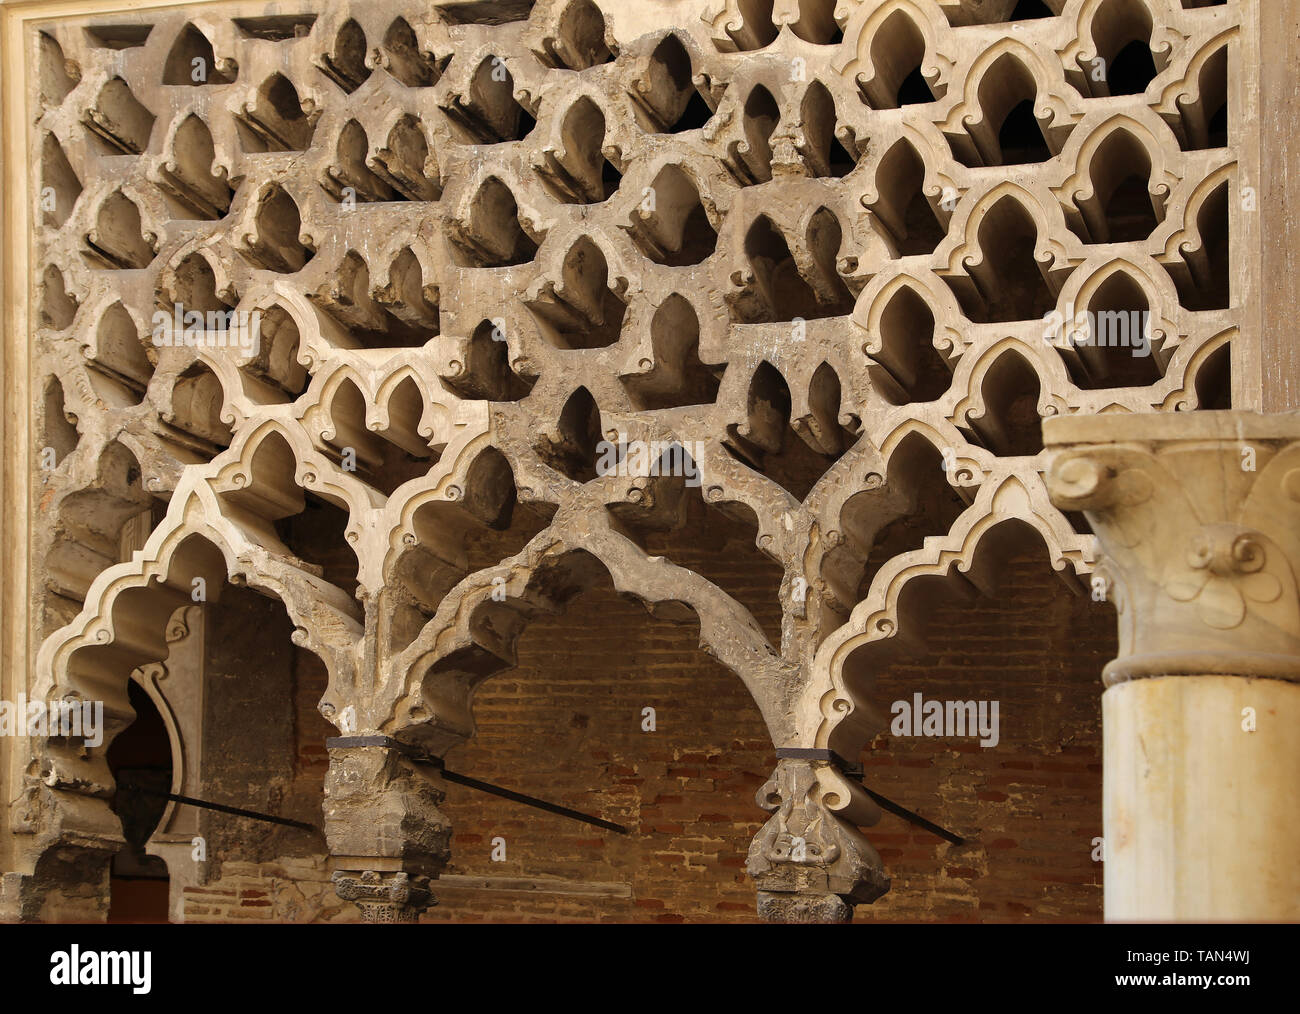 Spain. Seville. Alcazar of Seville. Patio del Yeso, 12th century. Part of old Almohad palace. South portico. Stock Photo